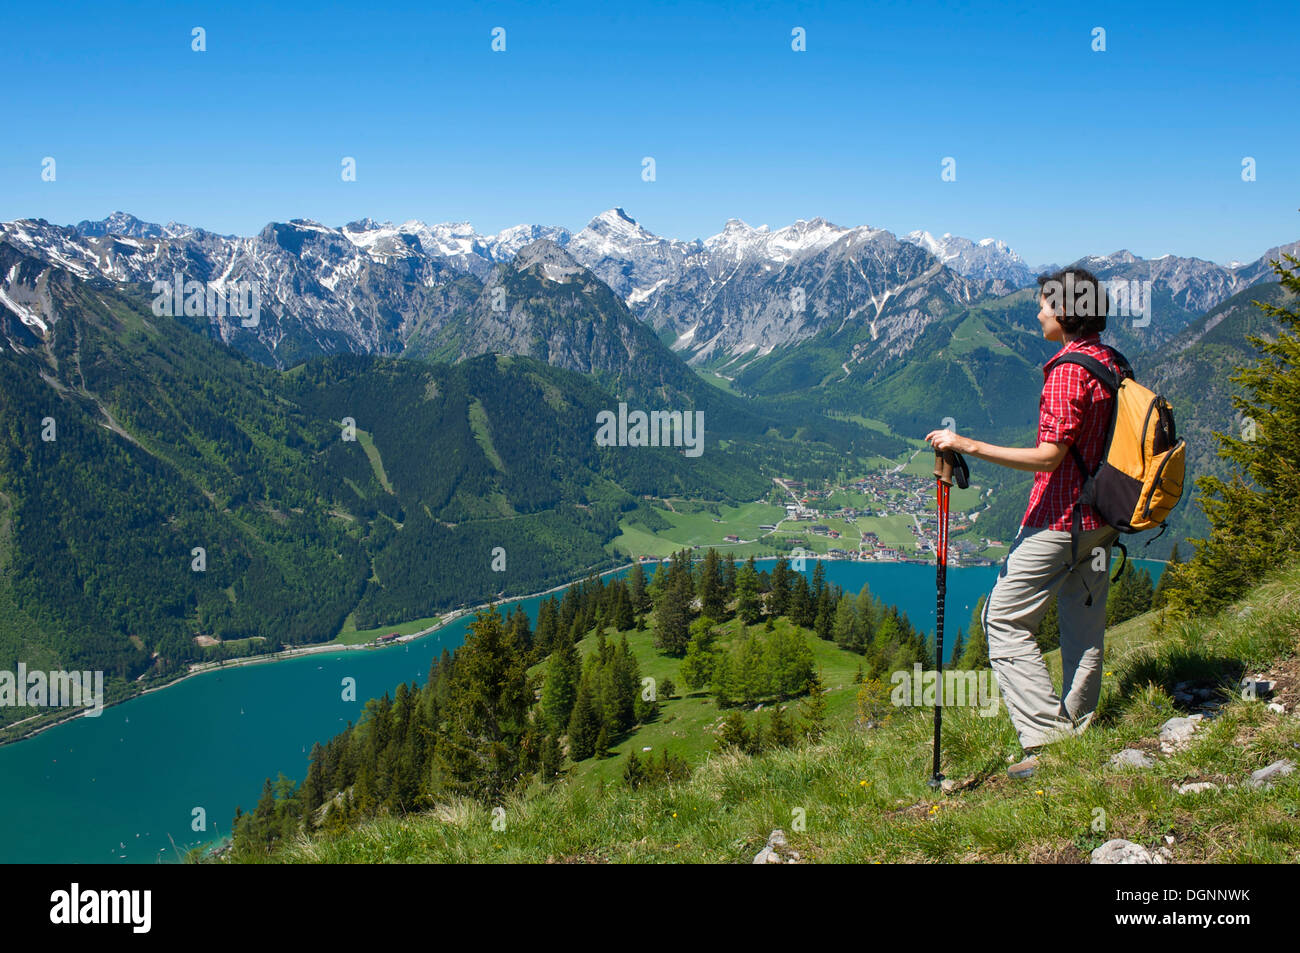 Hiker looking from the Durrakreuz viewing point on Lake Achensee, Tyrol ...